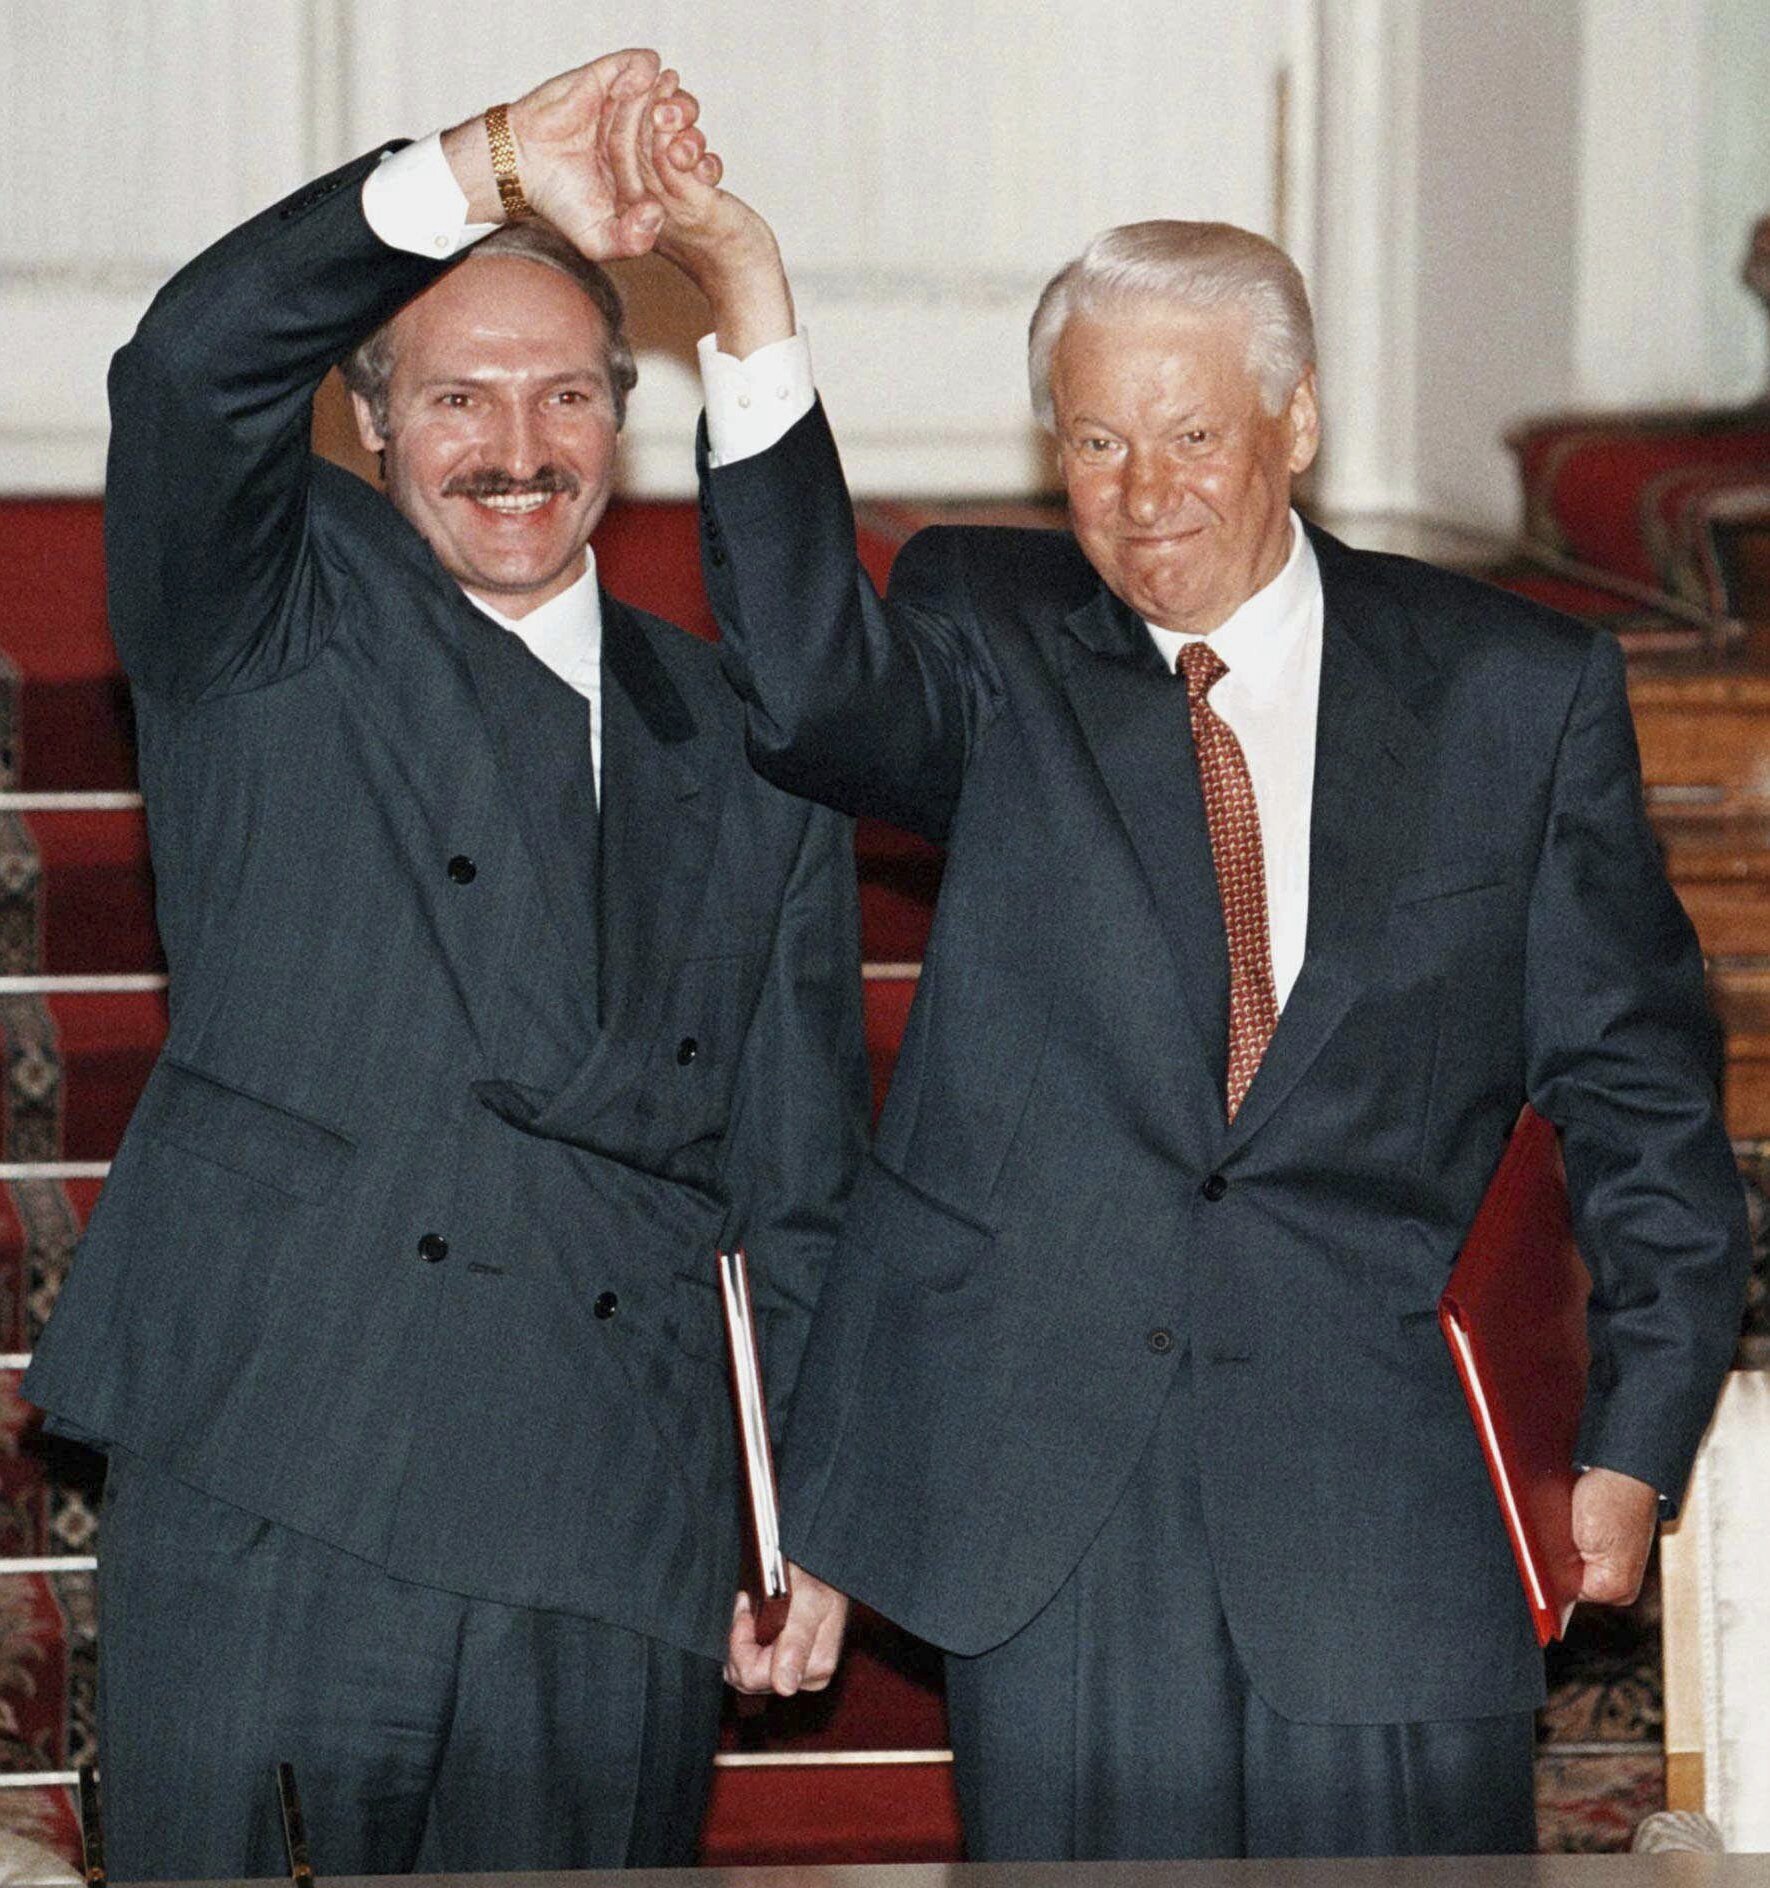 FILE – Russian President Boris Yeltsin and Belarusian President Alexander Lukashenko shake hands after signing a union charter at the Kremlin in Moscow, on May 23, 1997. Lukashenko this week marks 30 years in power. (Vladimir Mashatin/Pool Photo via AP, File)